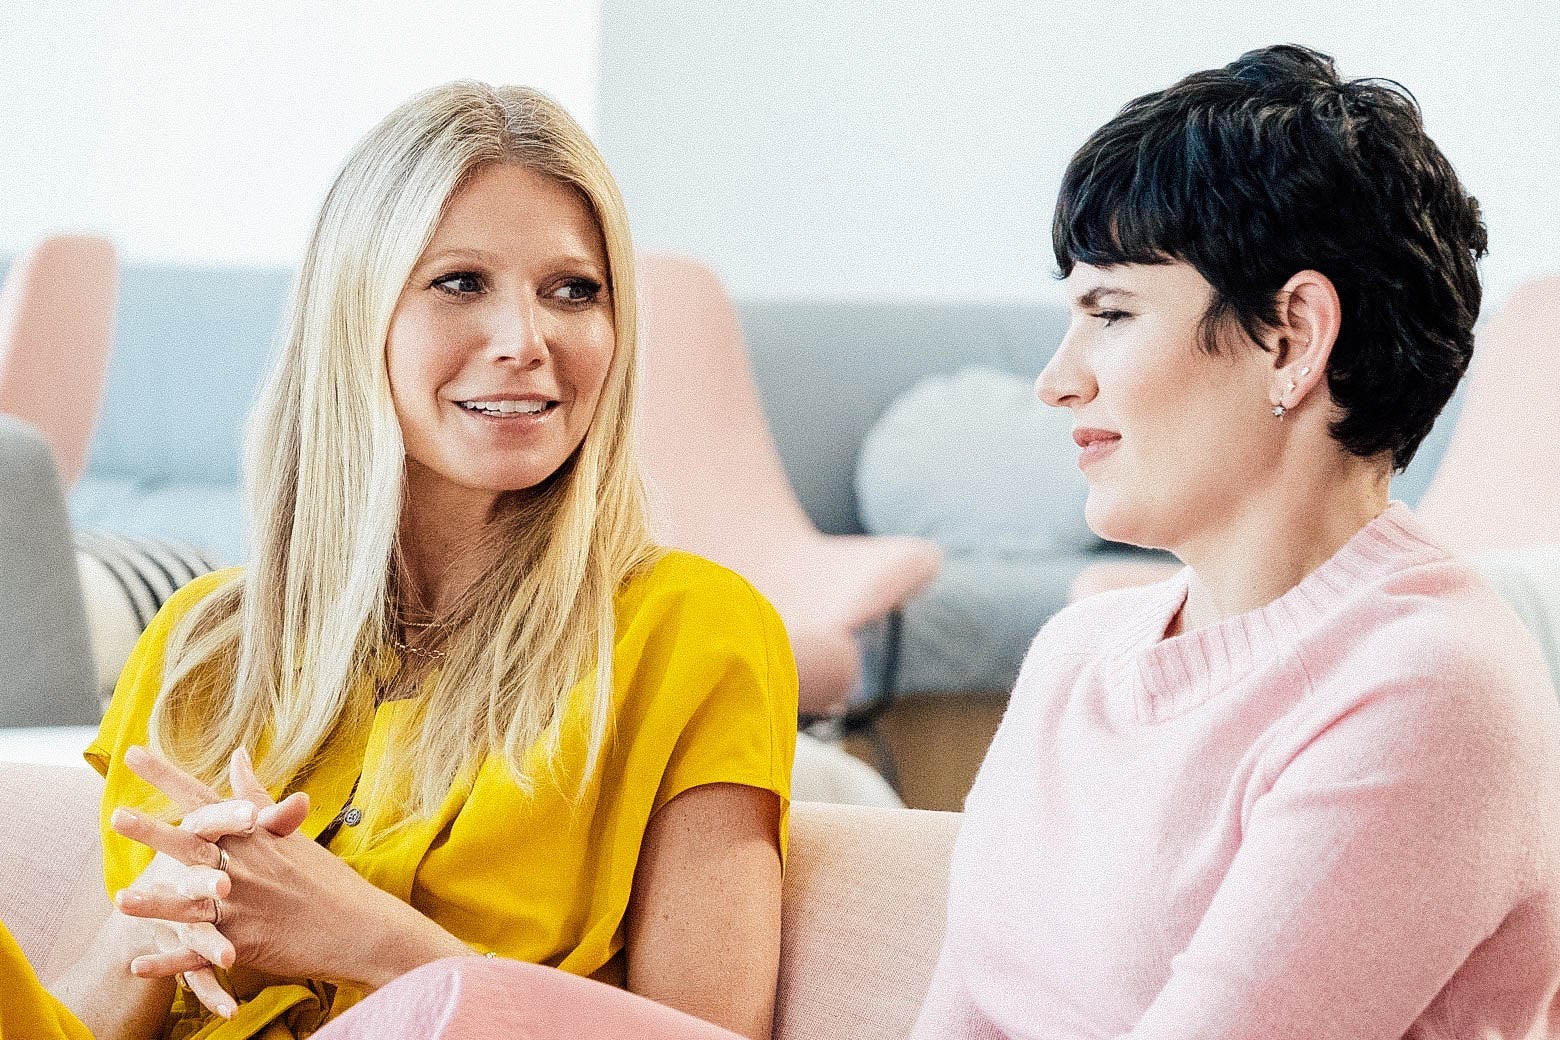 Gwyneth Paltrow talks to Goop's Chief Content Officer in a still from her new show, the Goop Lab.